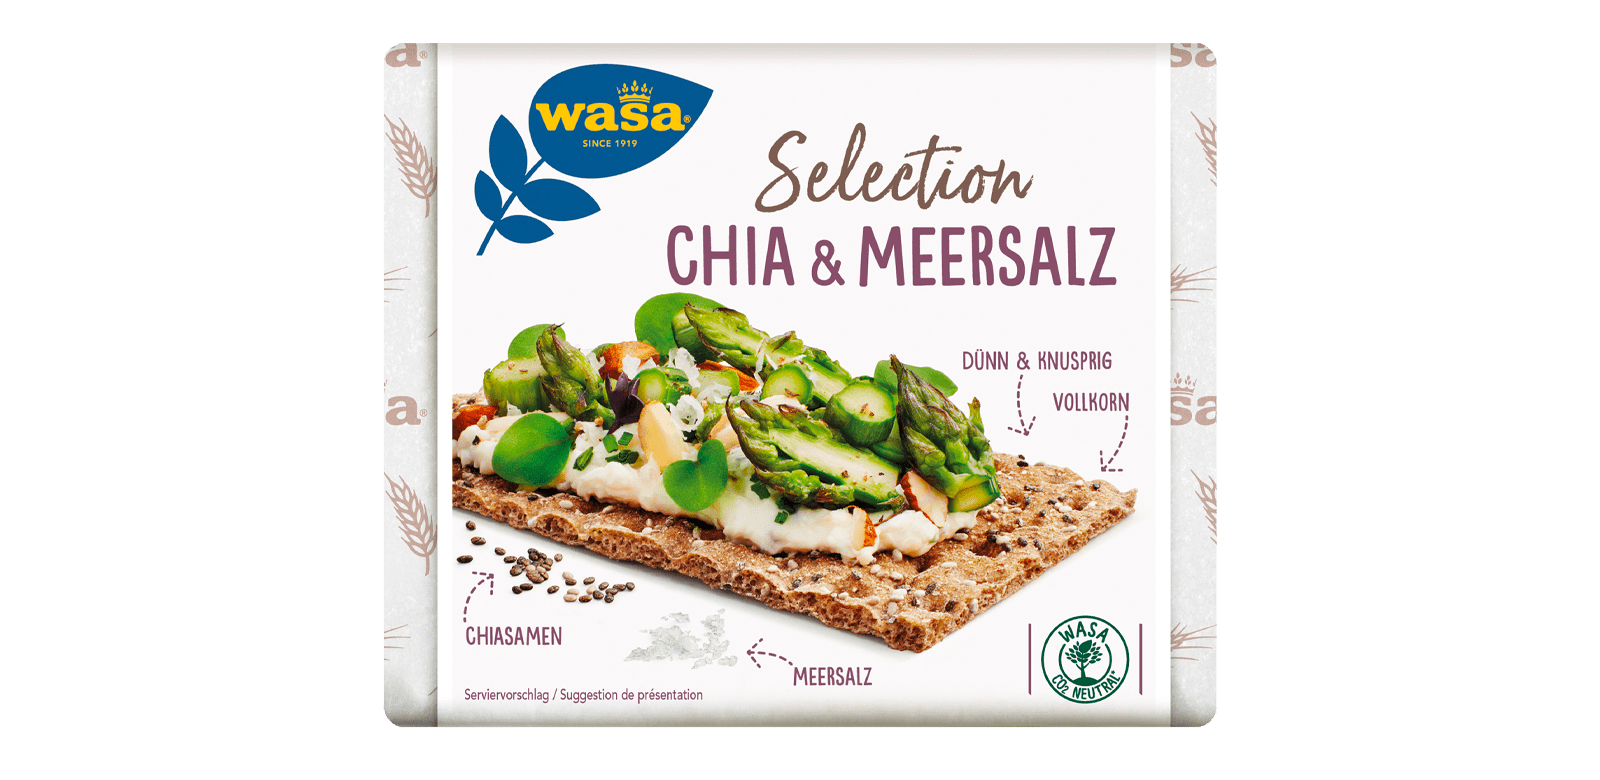 Selection Chia & Meersalz packed